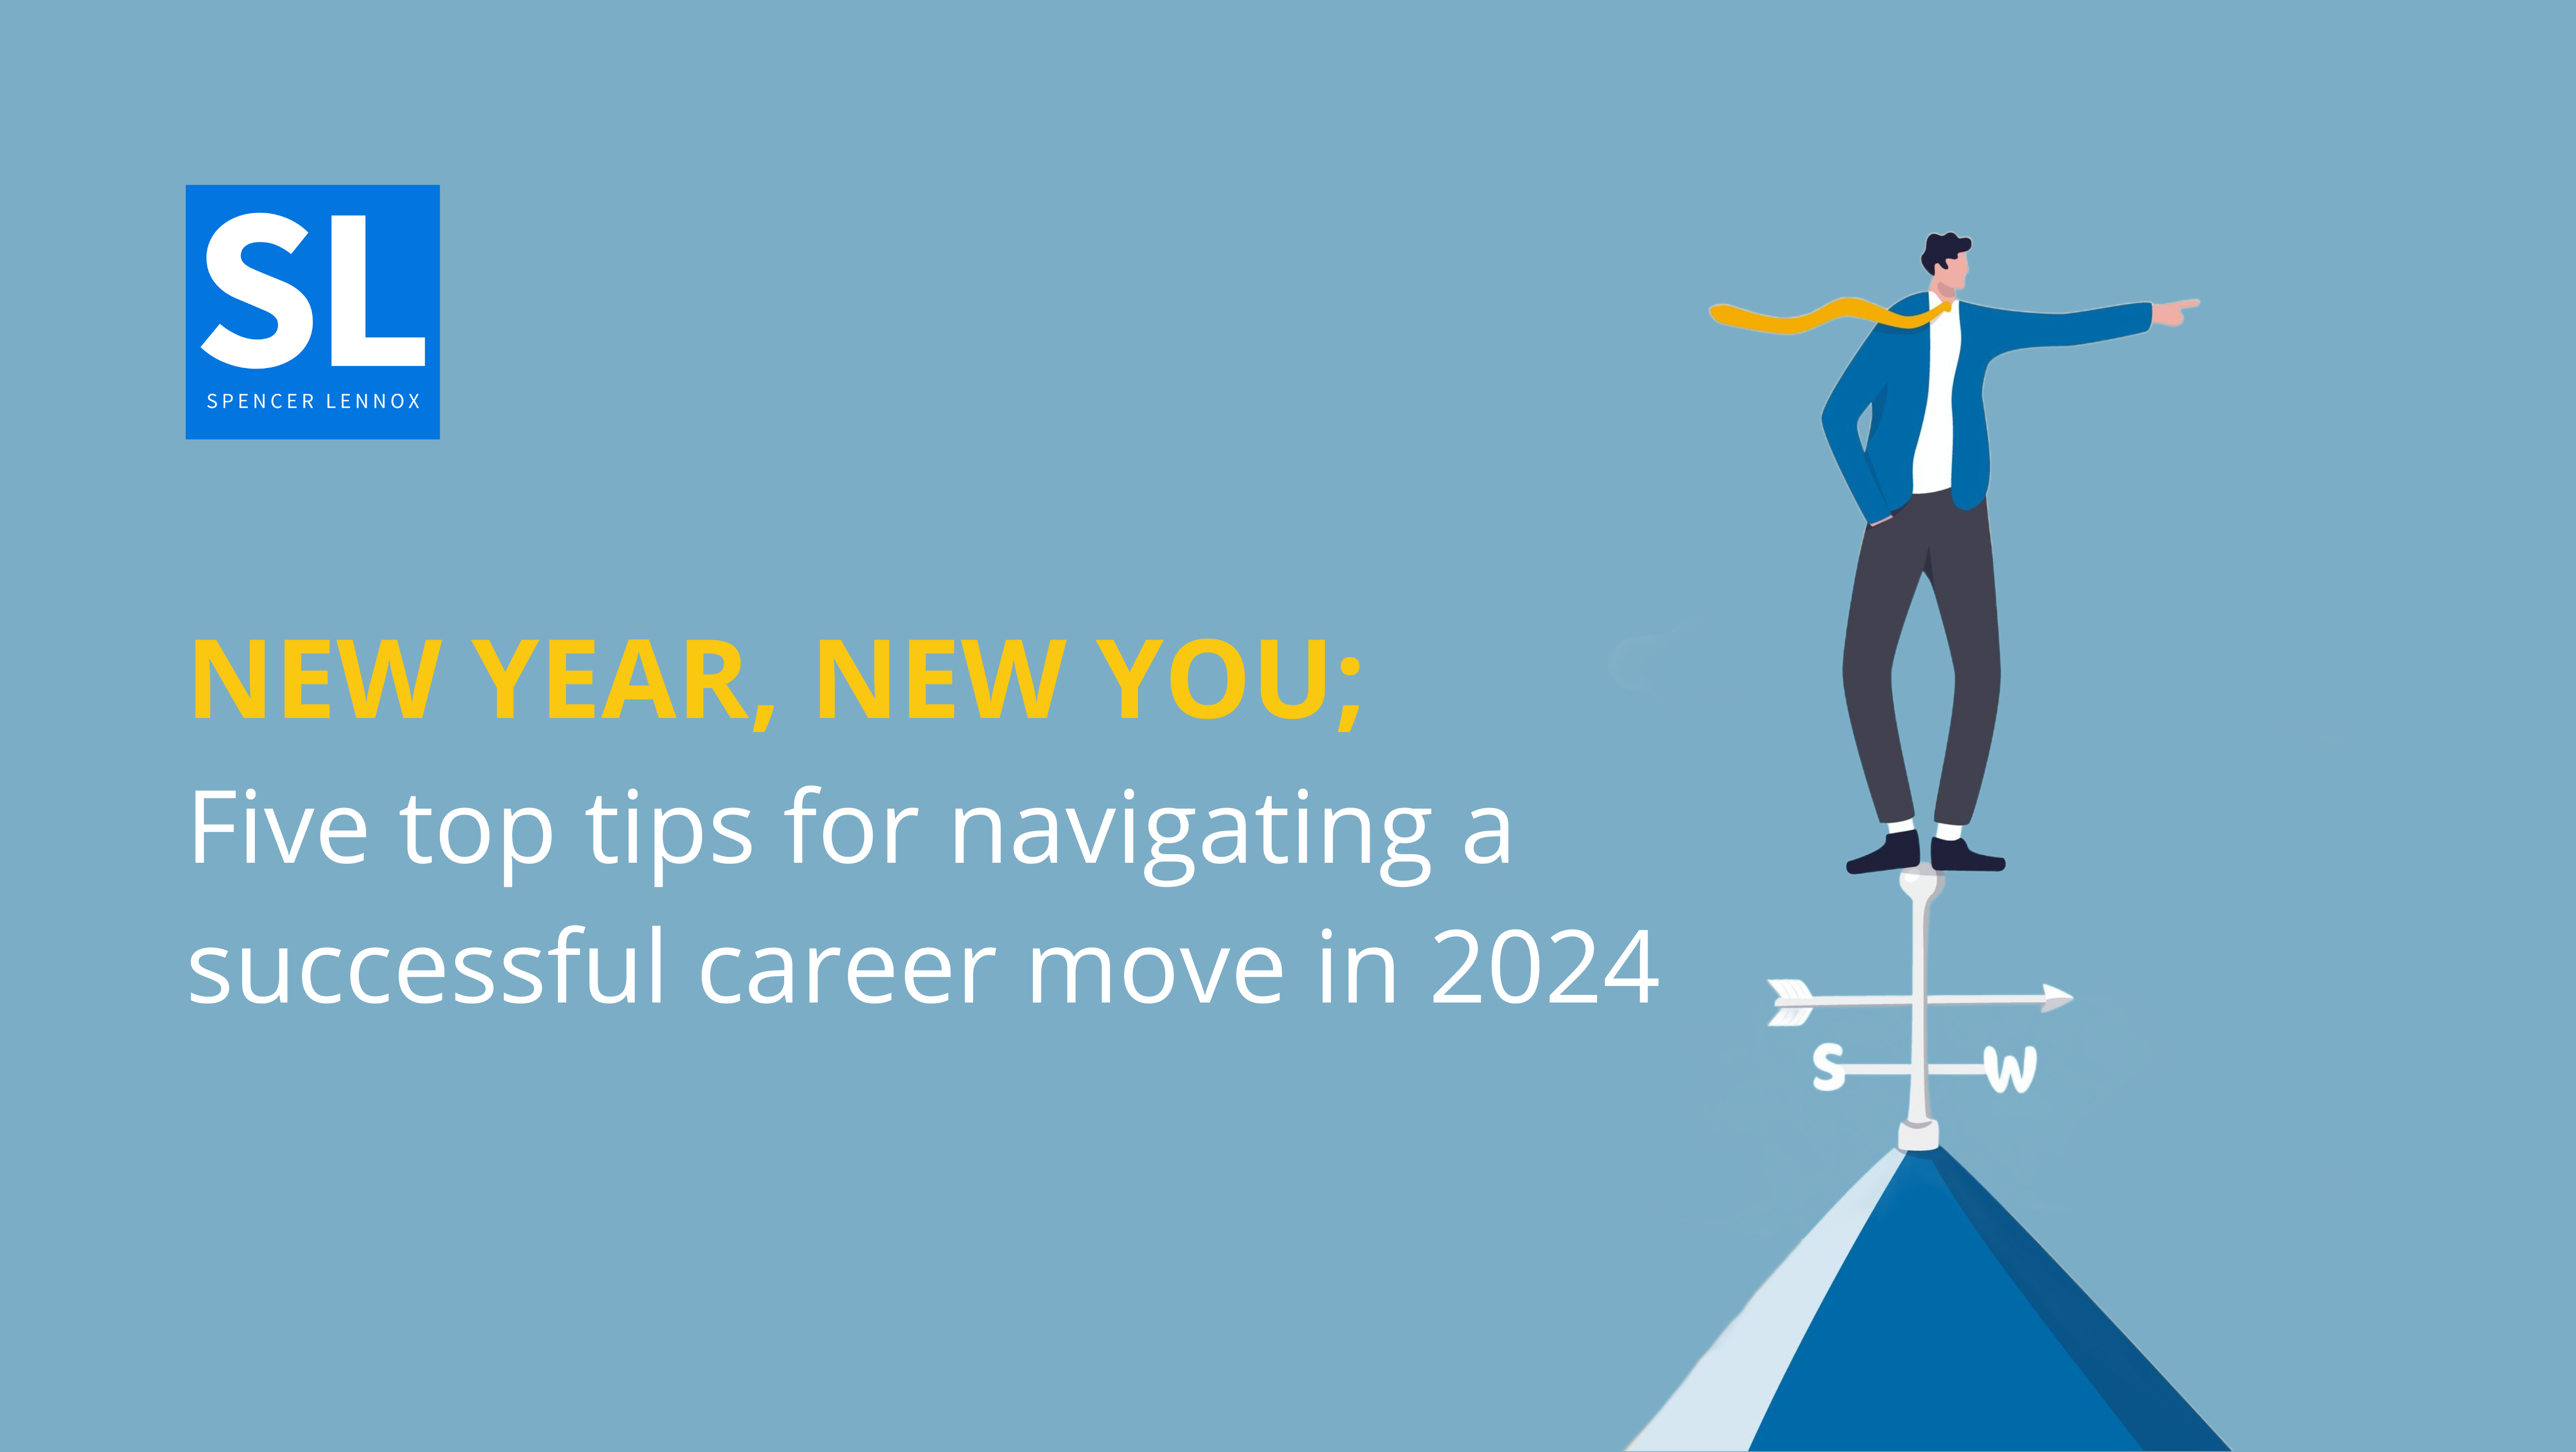 New Year, New You: Five Top Tips for Navigating a Successful Career Move in 2024